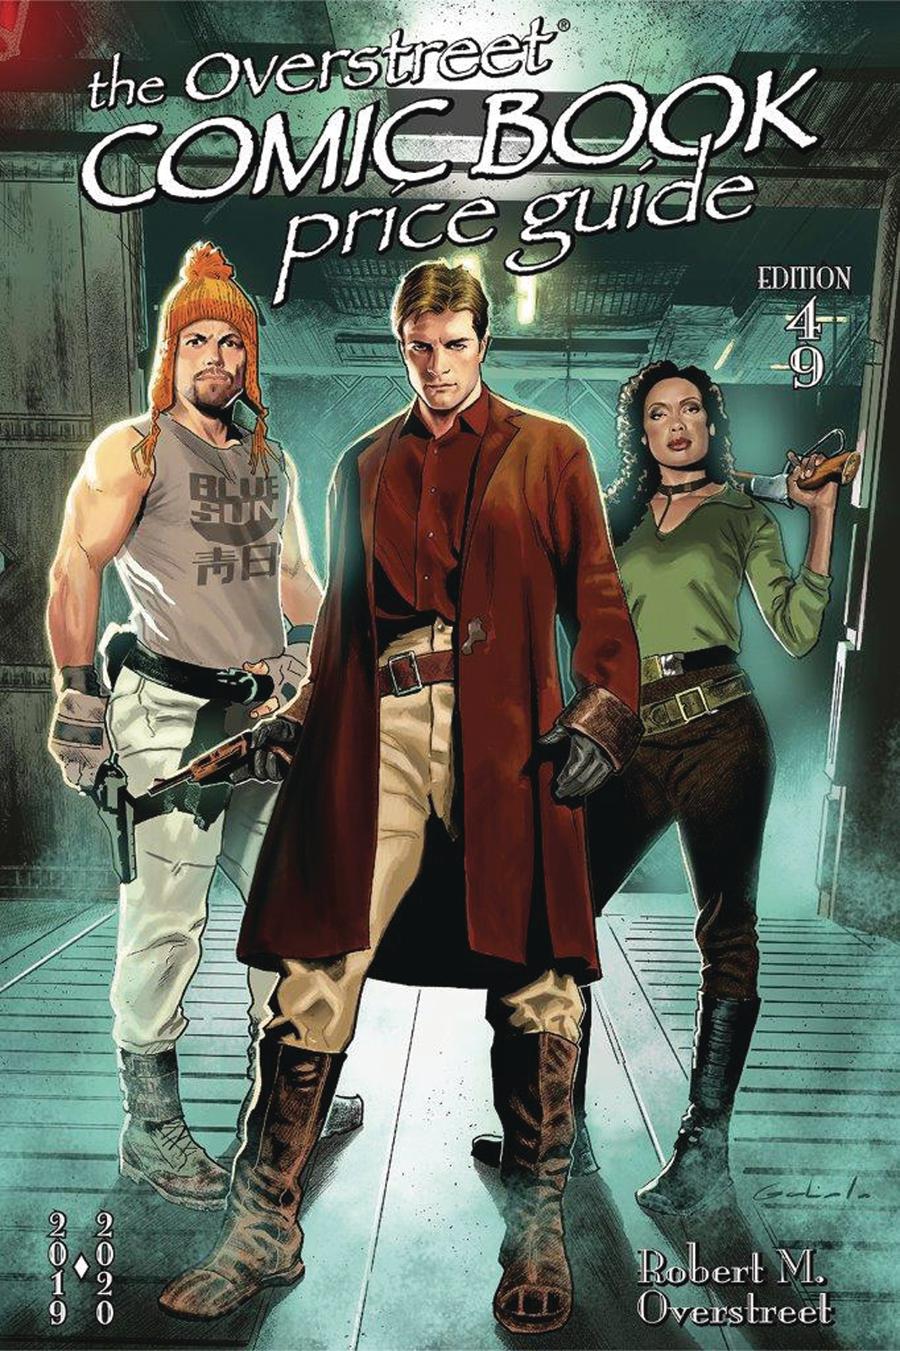 Overstreet Comic Book Price Guide Vol 49 SC Firefly